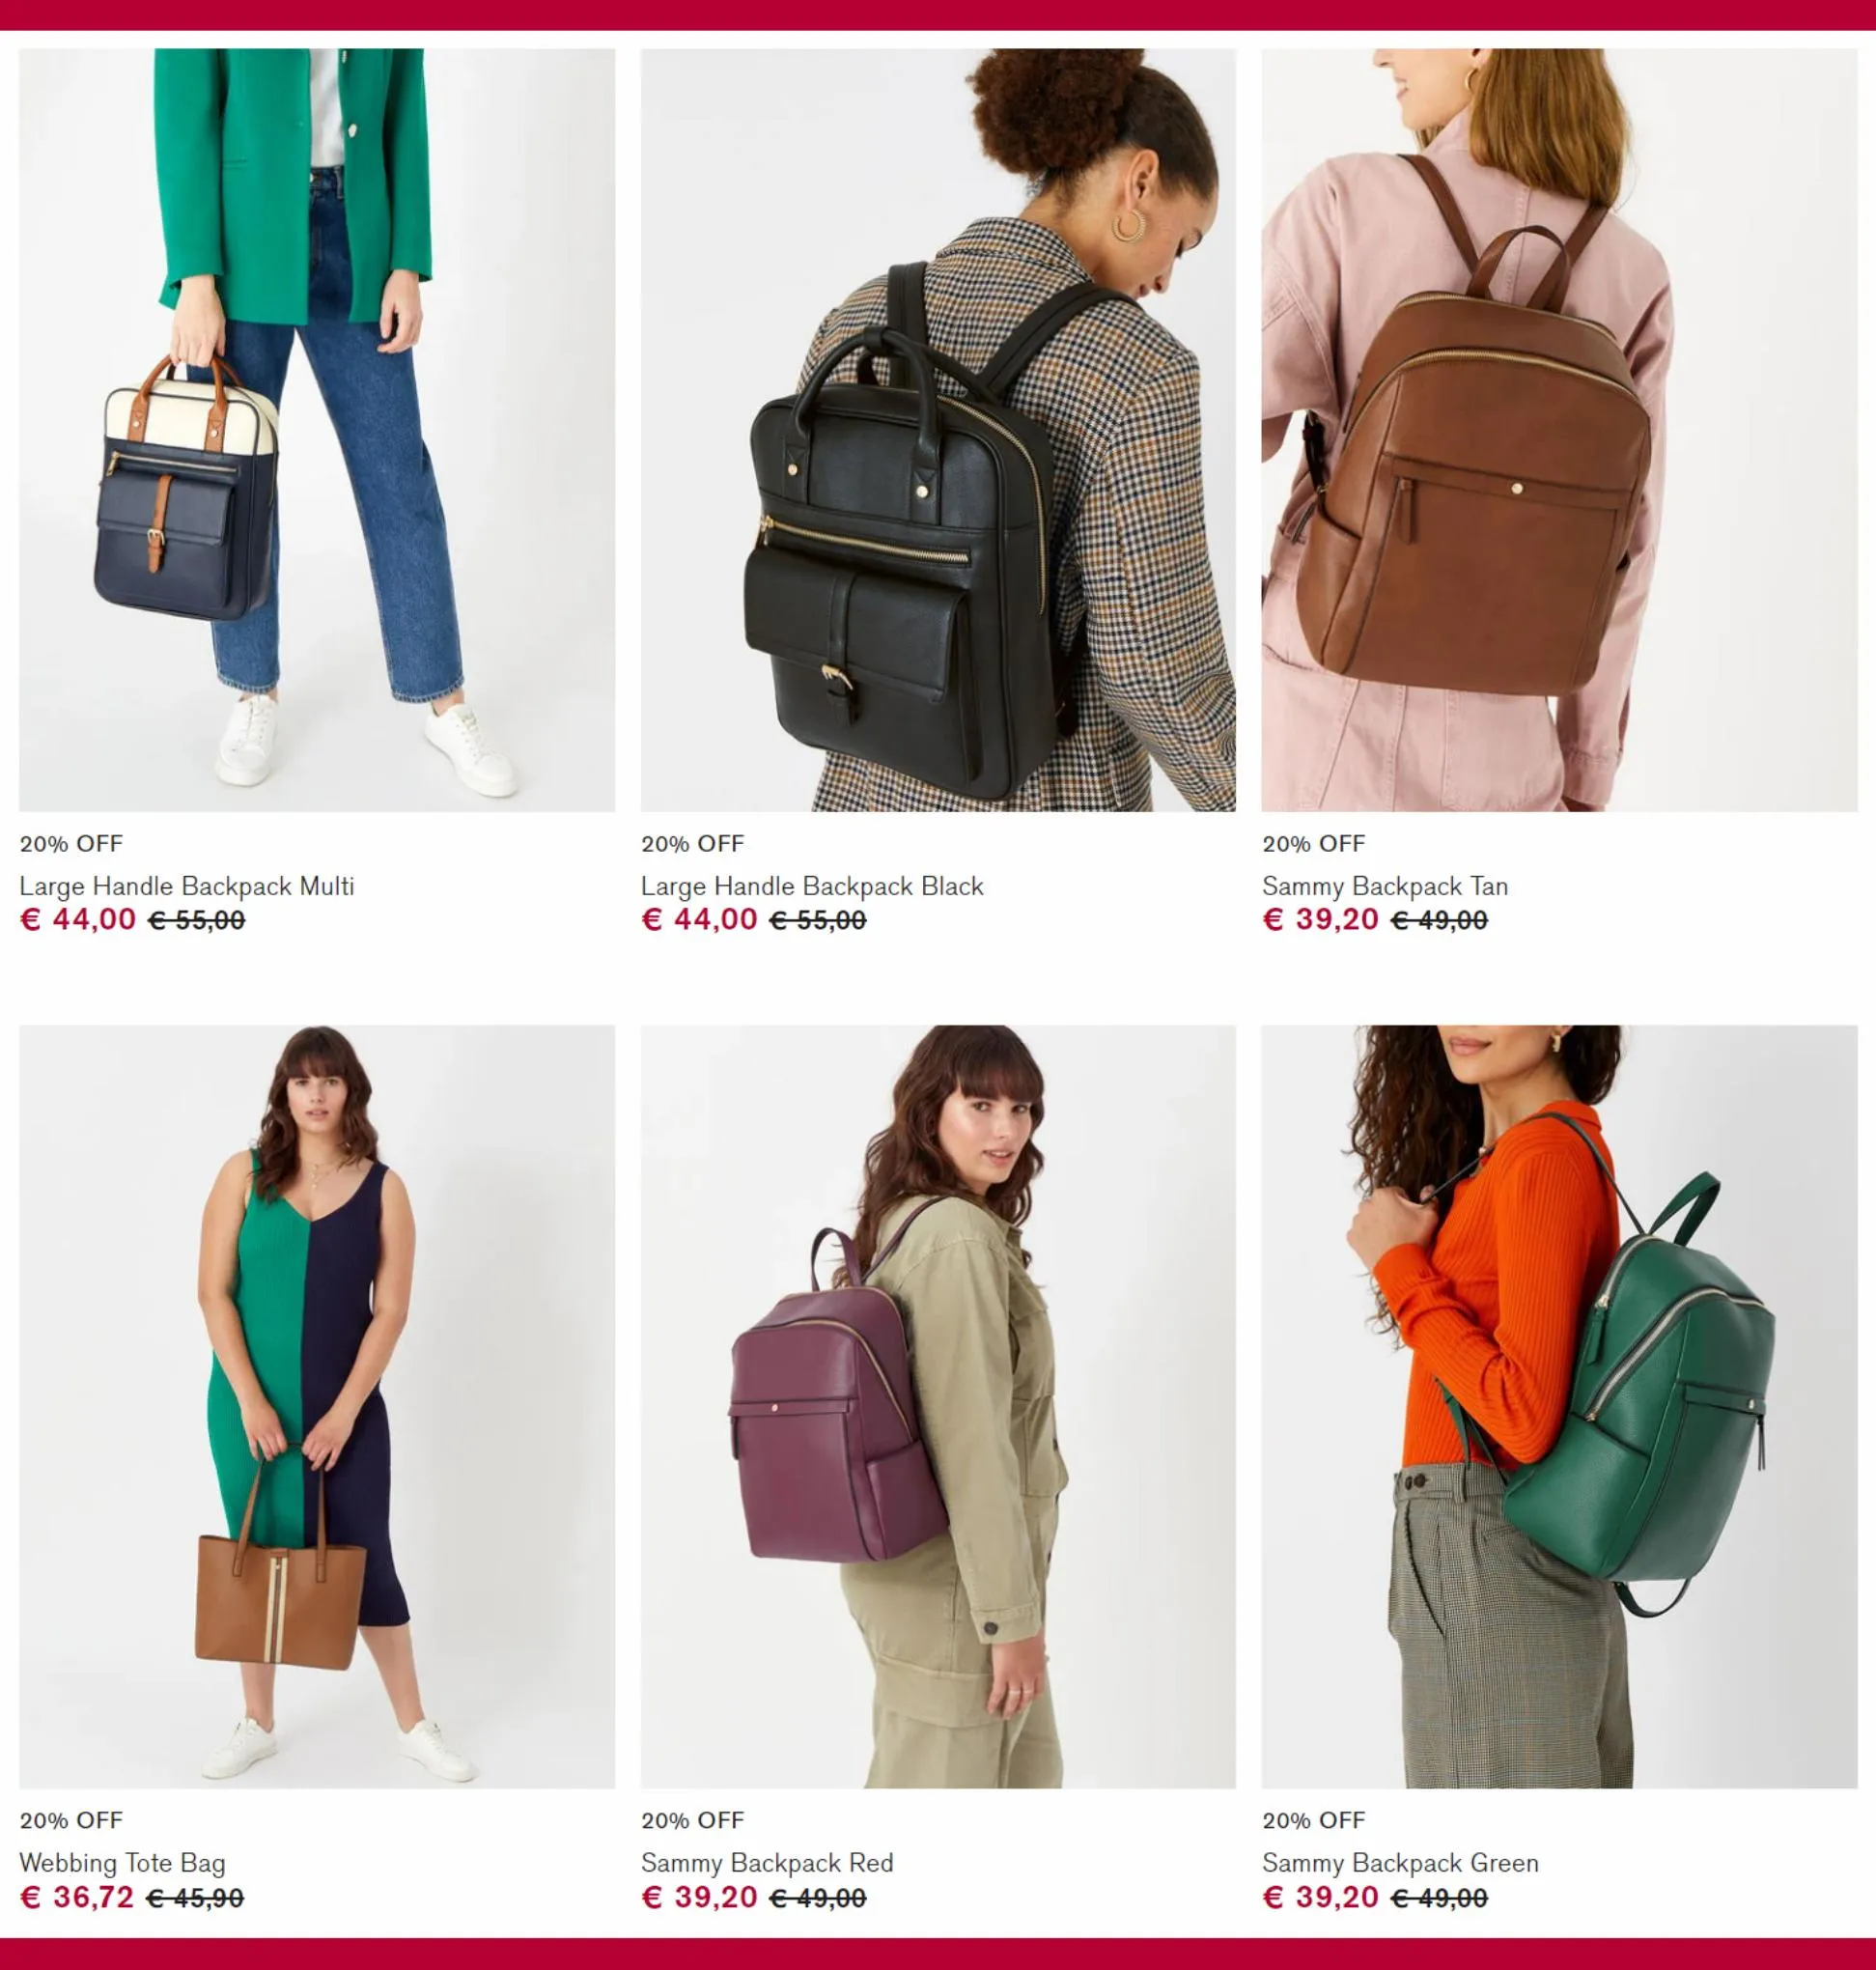 Catalogue 20% off bestselling bags, page 00004